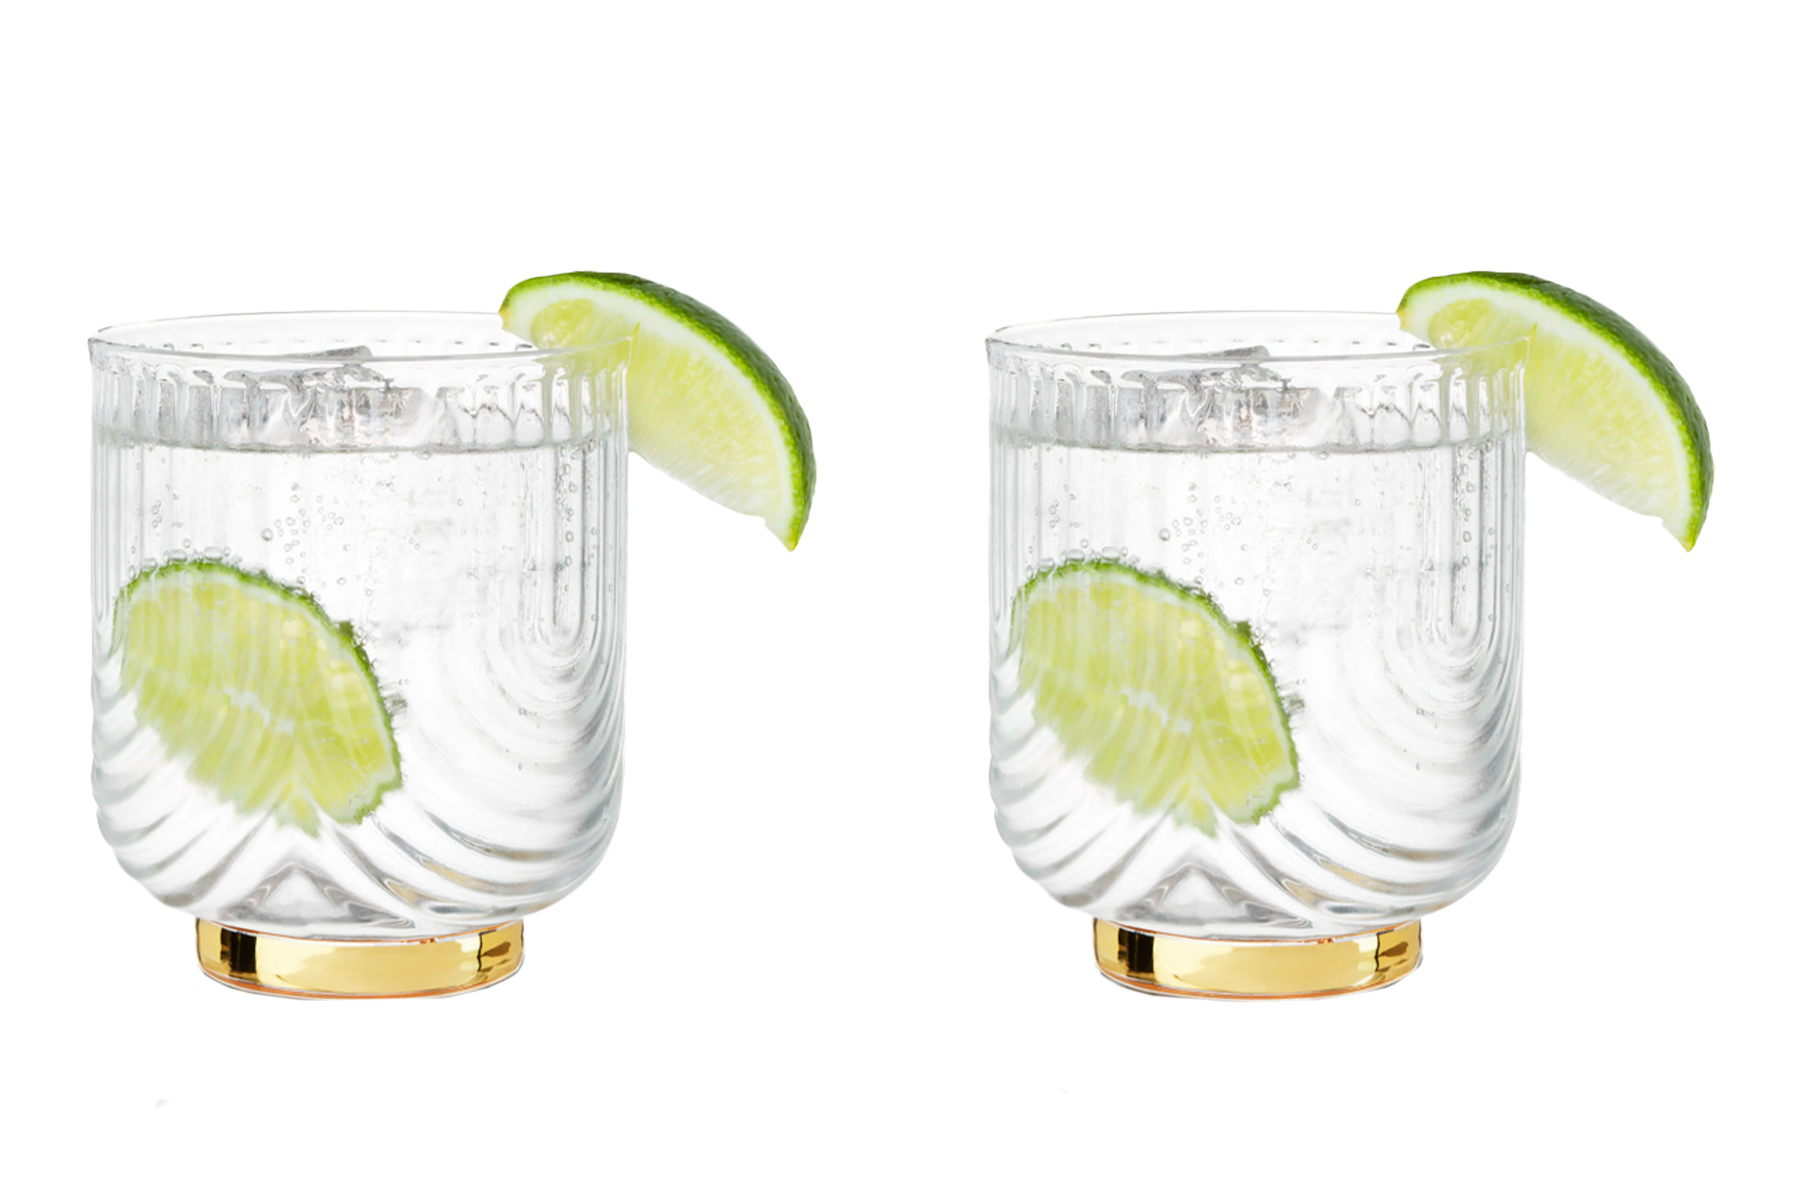 gatsby glass tumblers from all good things